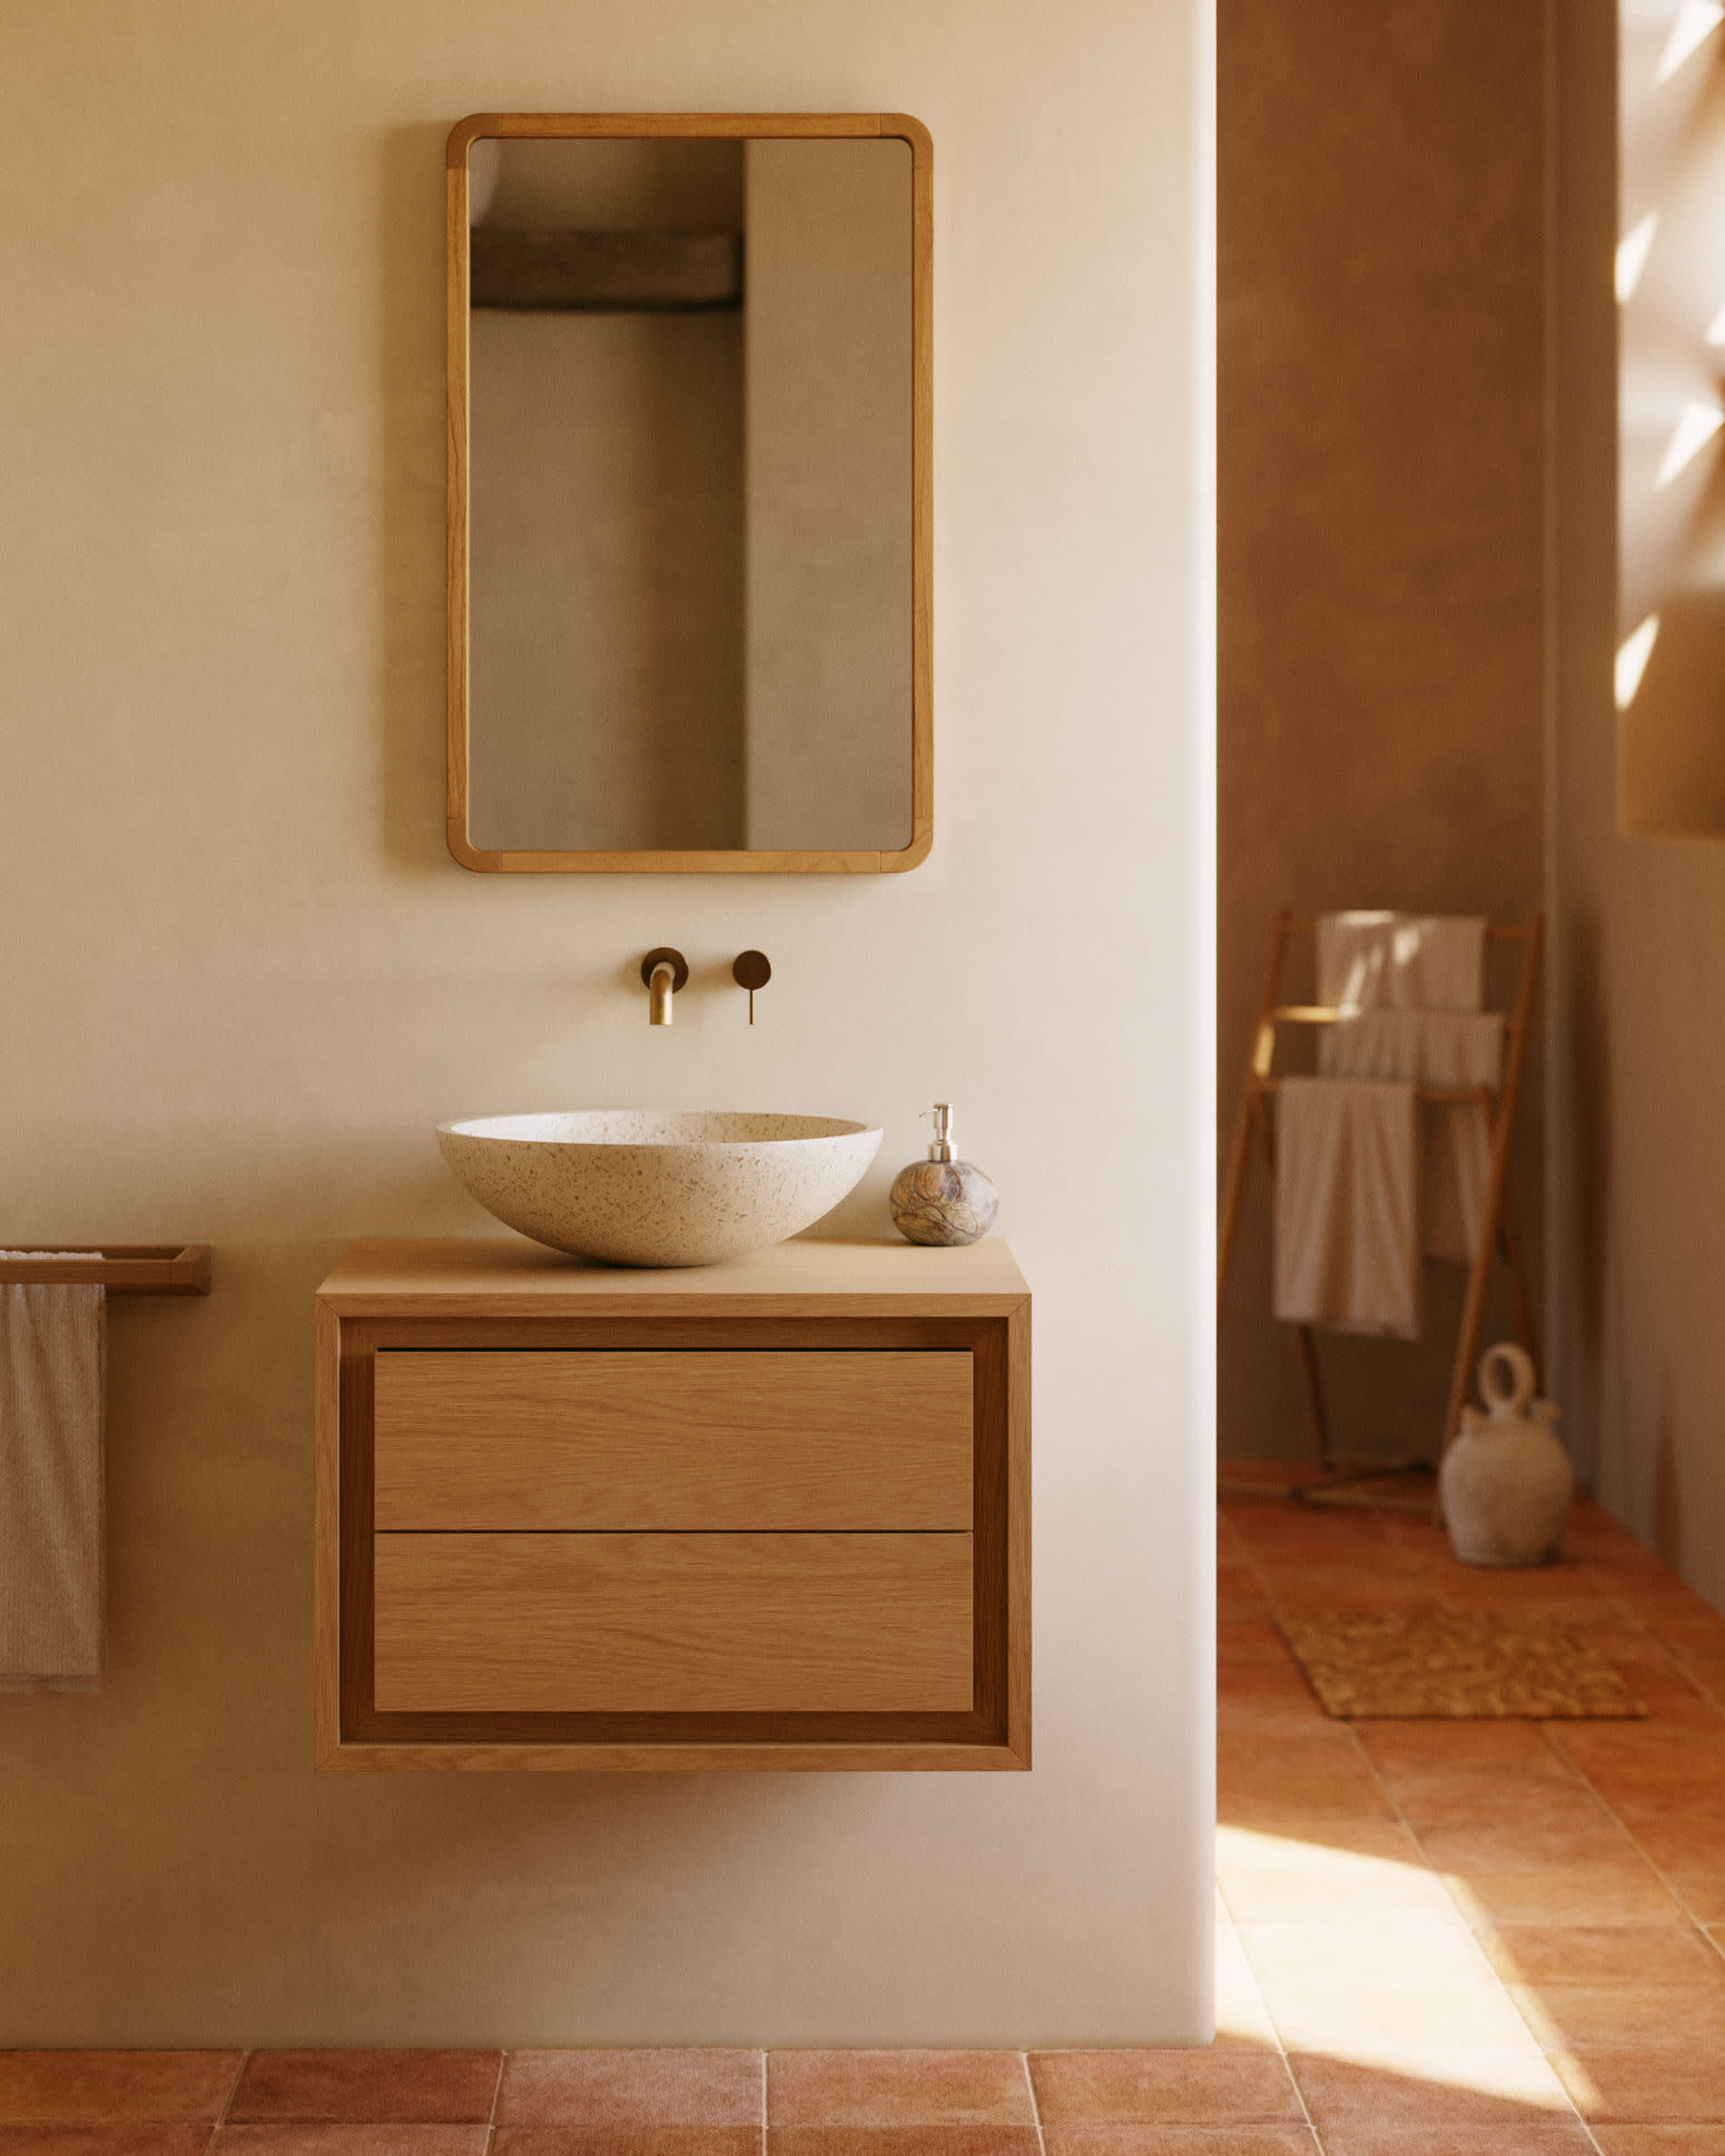 Kenta bathroom furniture in solid teak wood with a natural finish,  60 x 45 cm